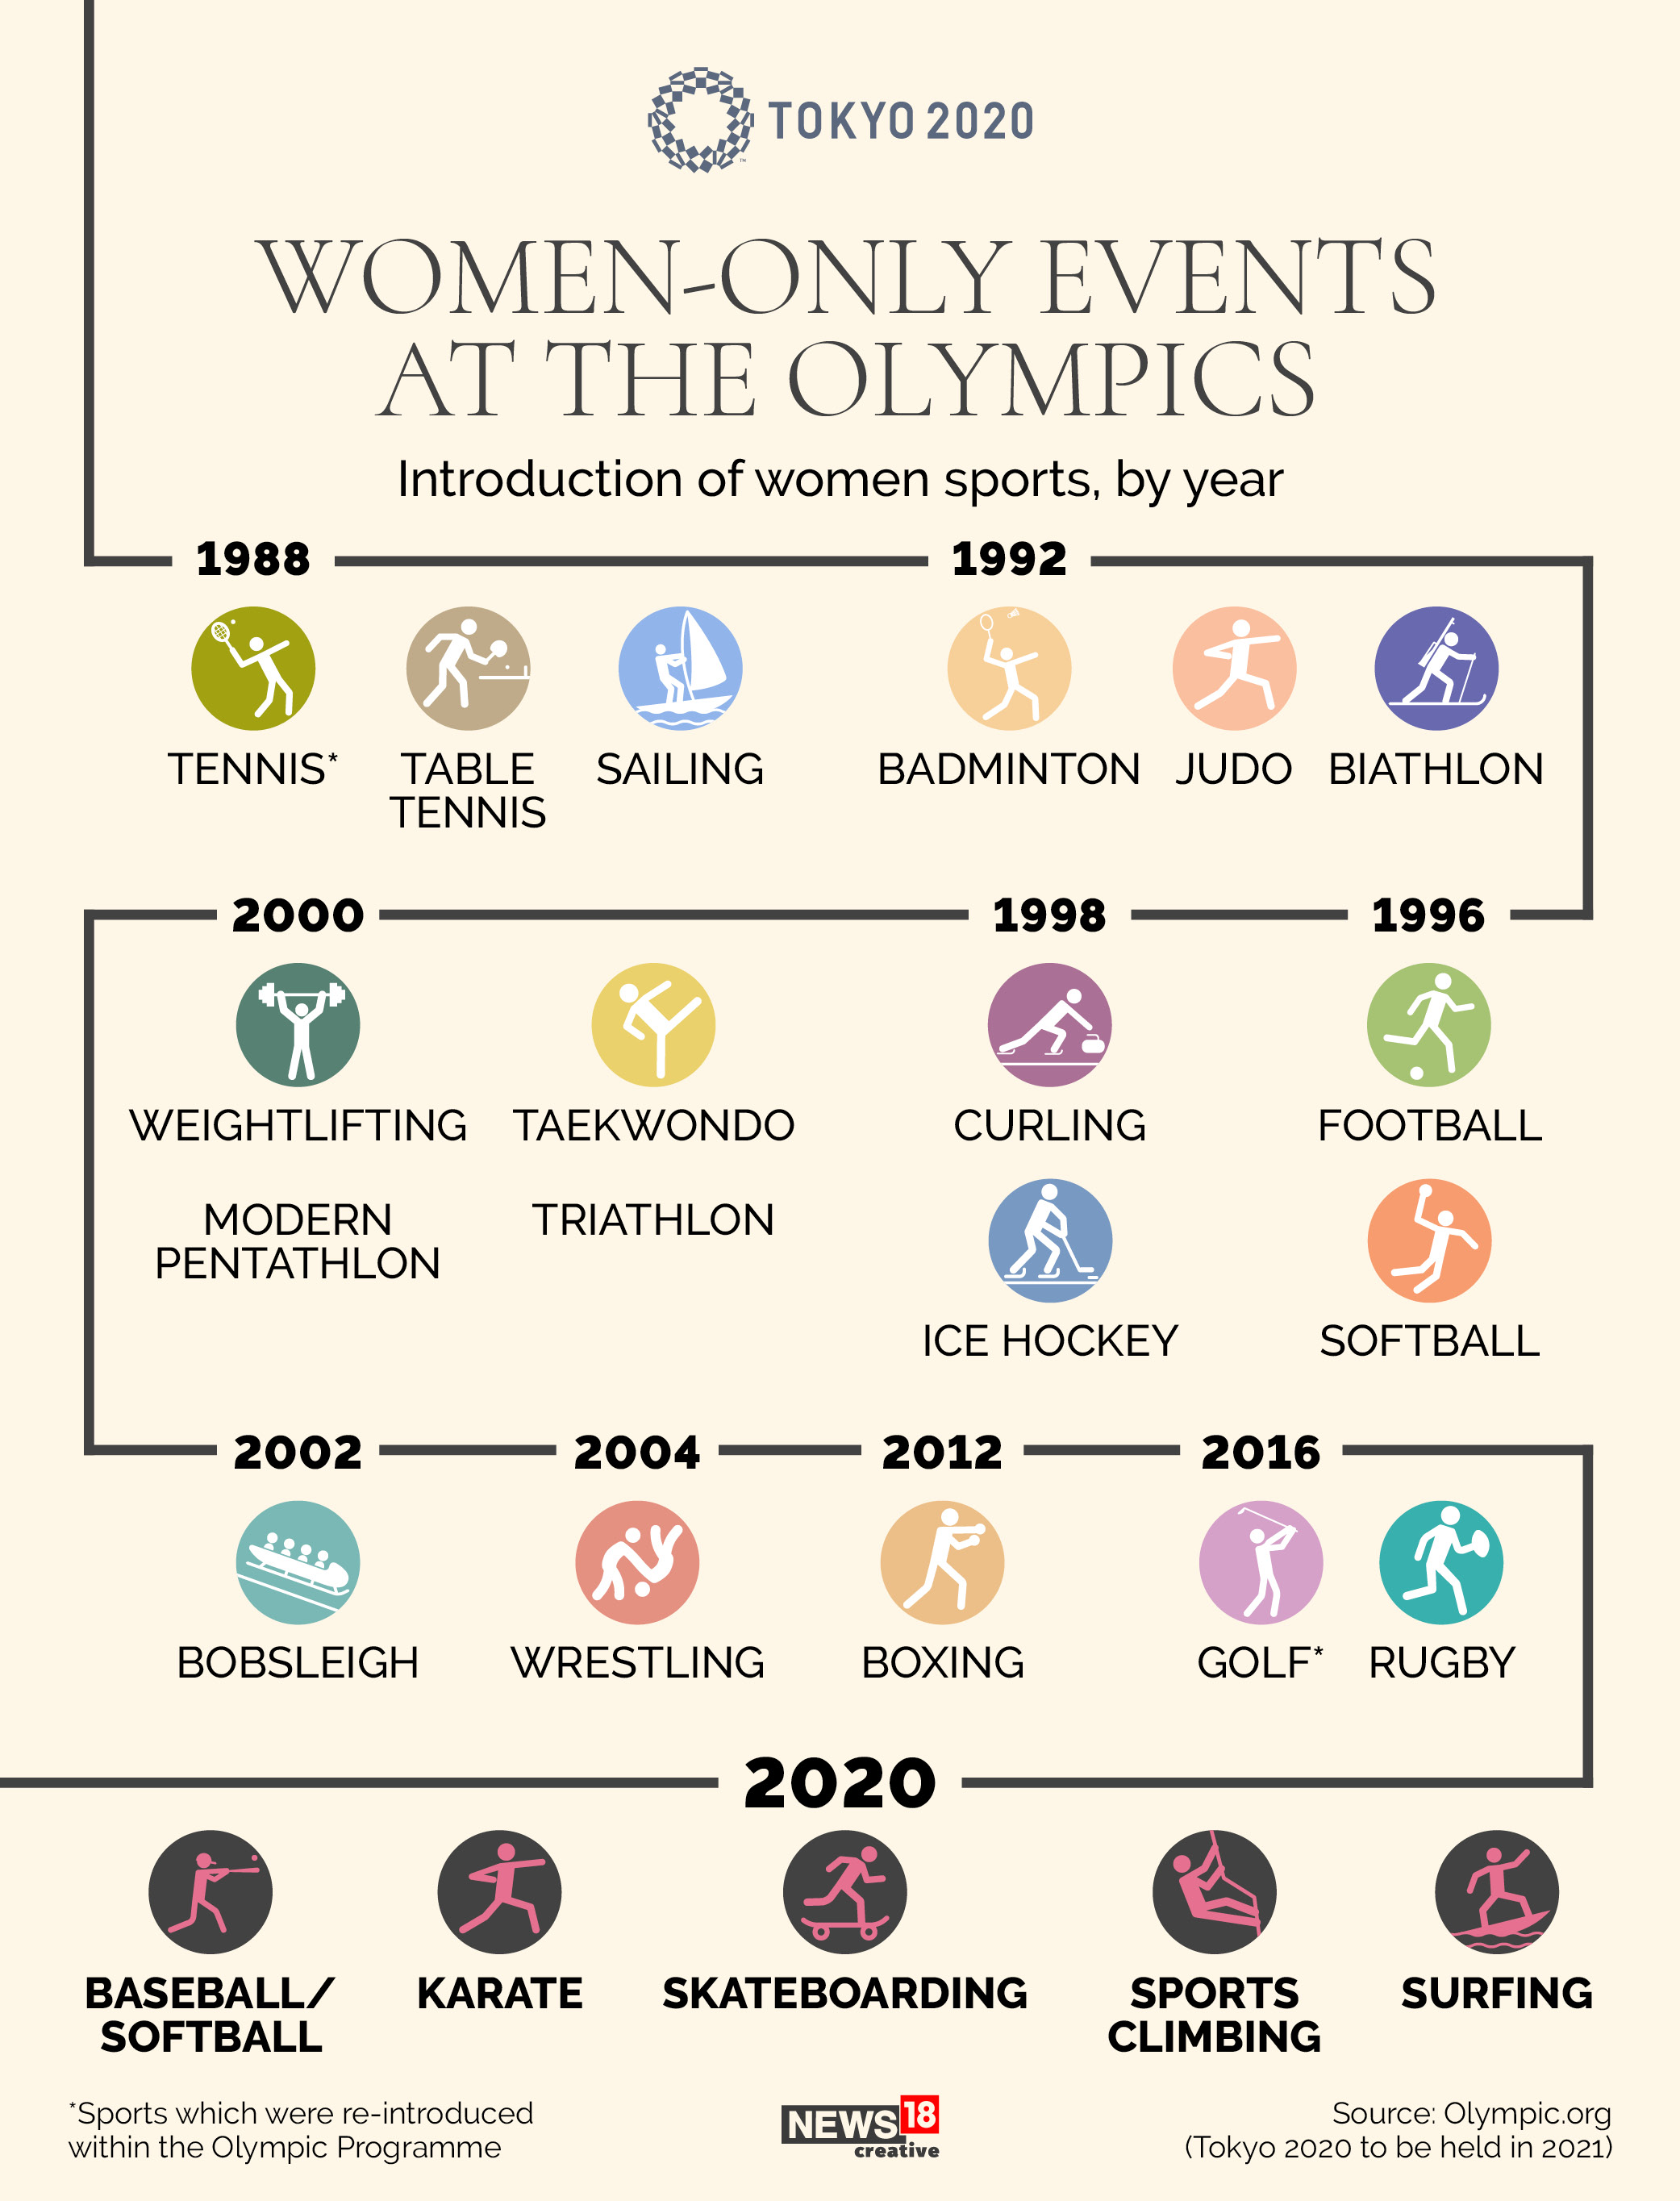 The Olympic journey towards gender equality